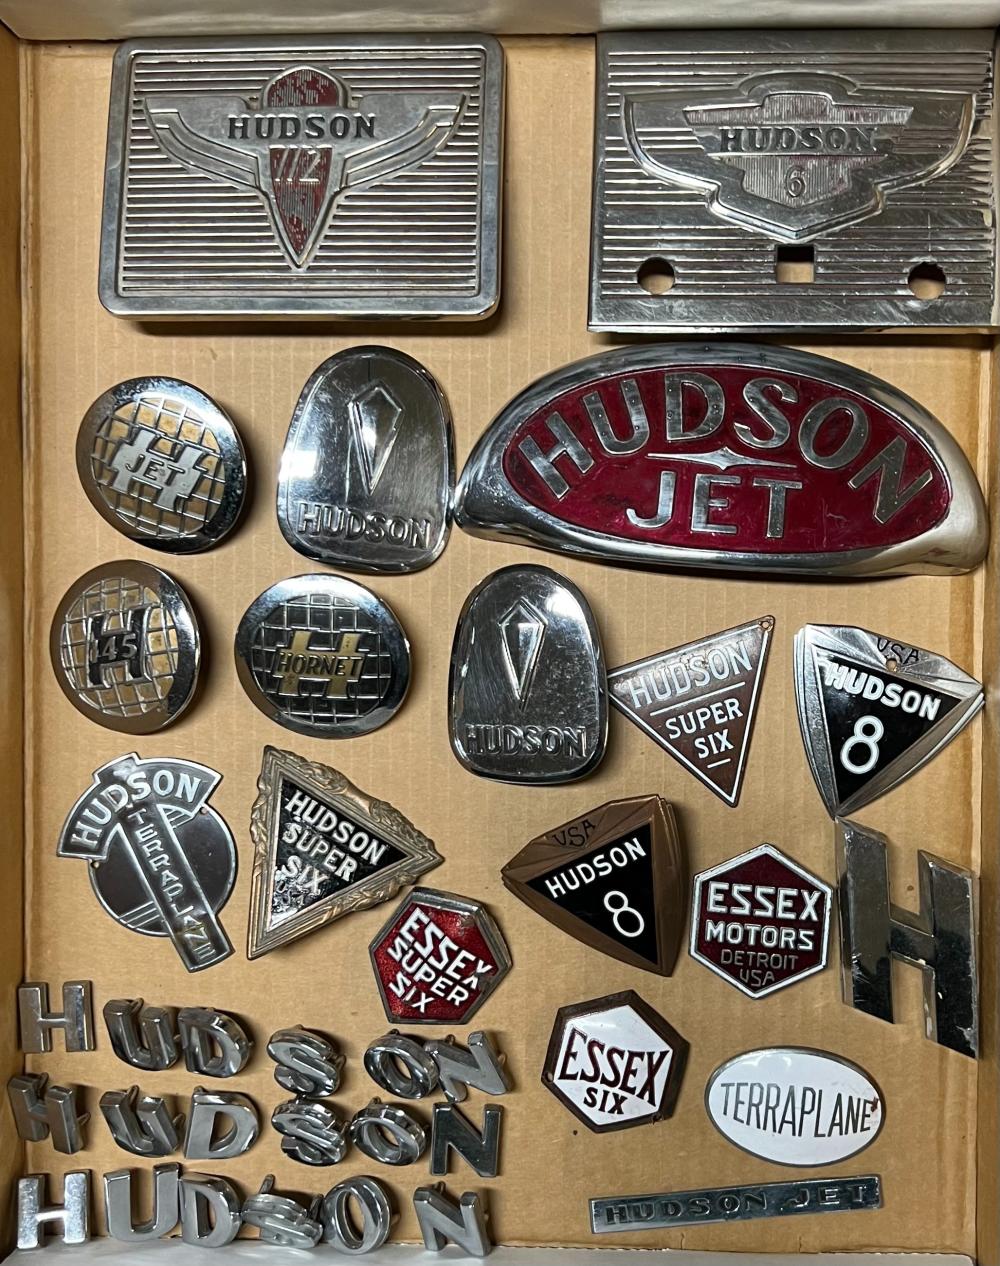 HUDSON AND ESSEX BADGES, NAME PLATES,